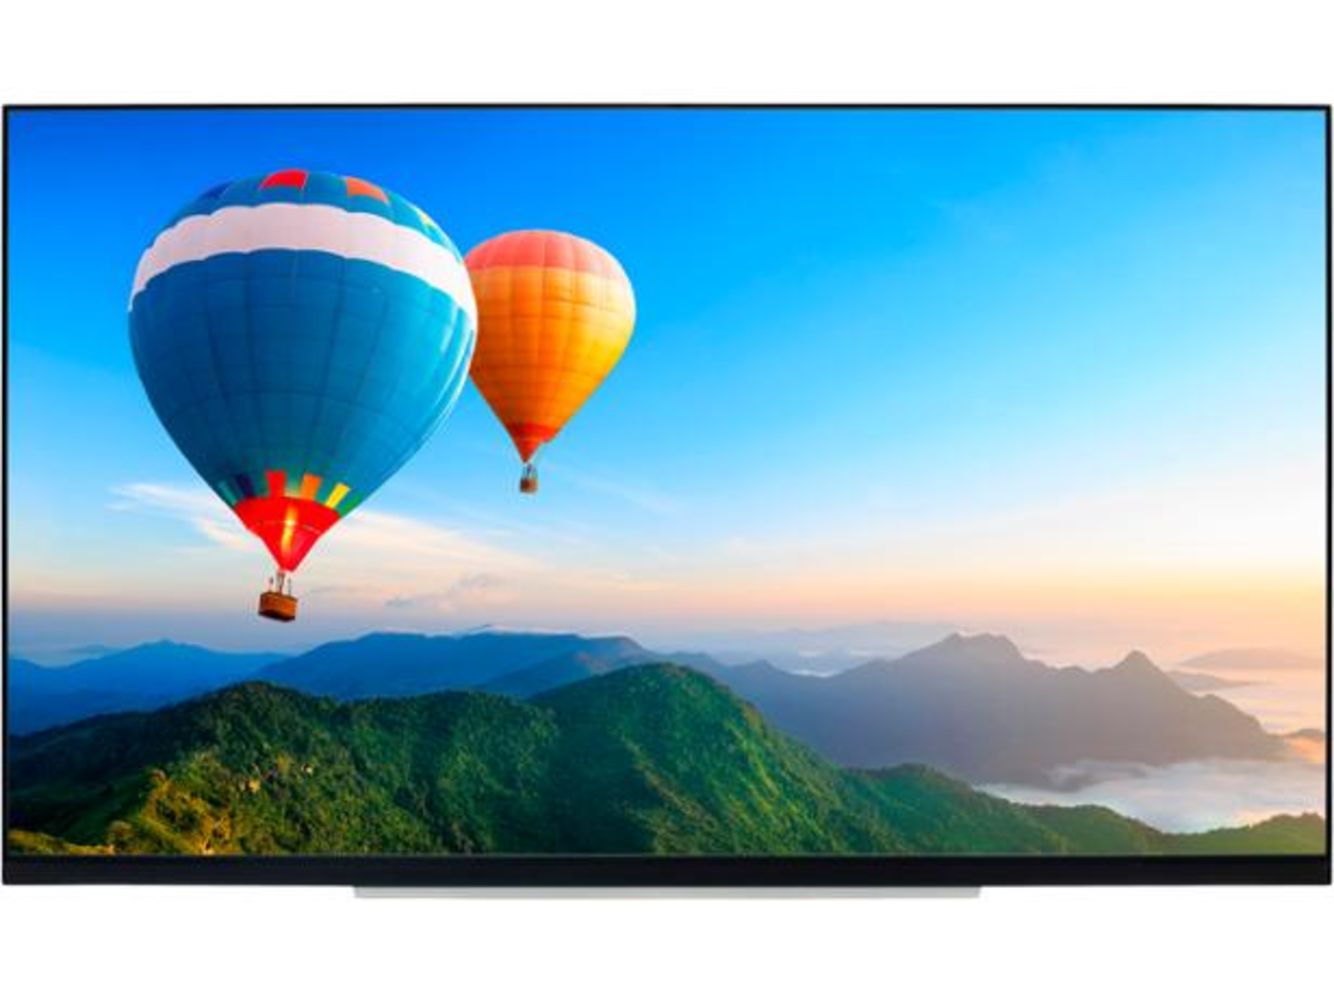 Midweek Catalogue Sale: Including TVs, Monitors, Tech, Toys, Homewares & More